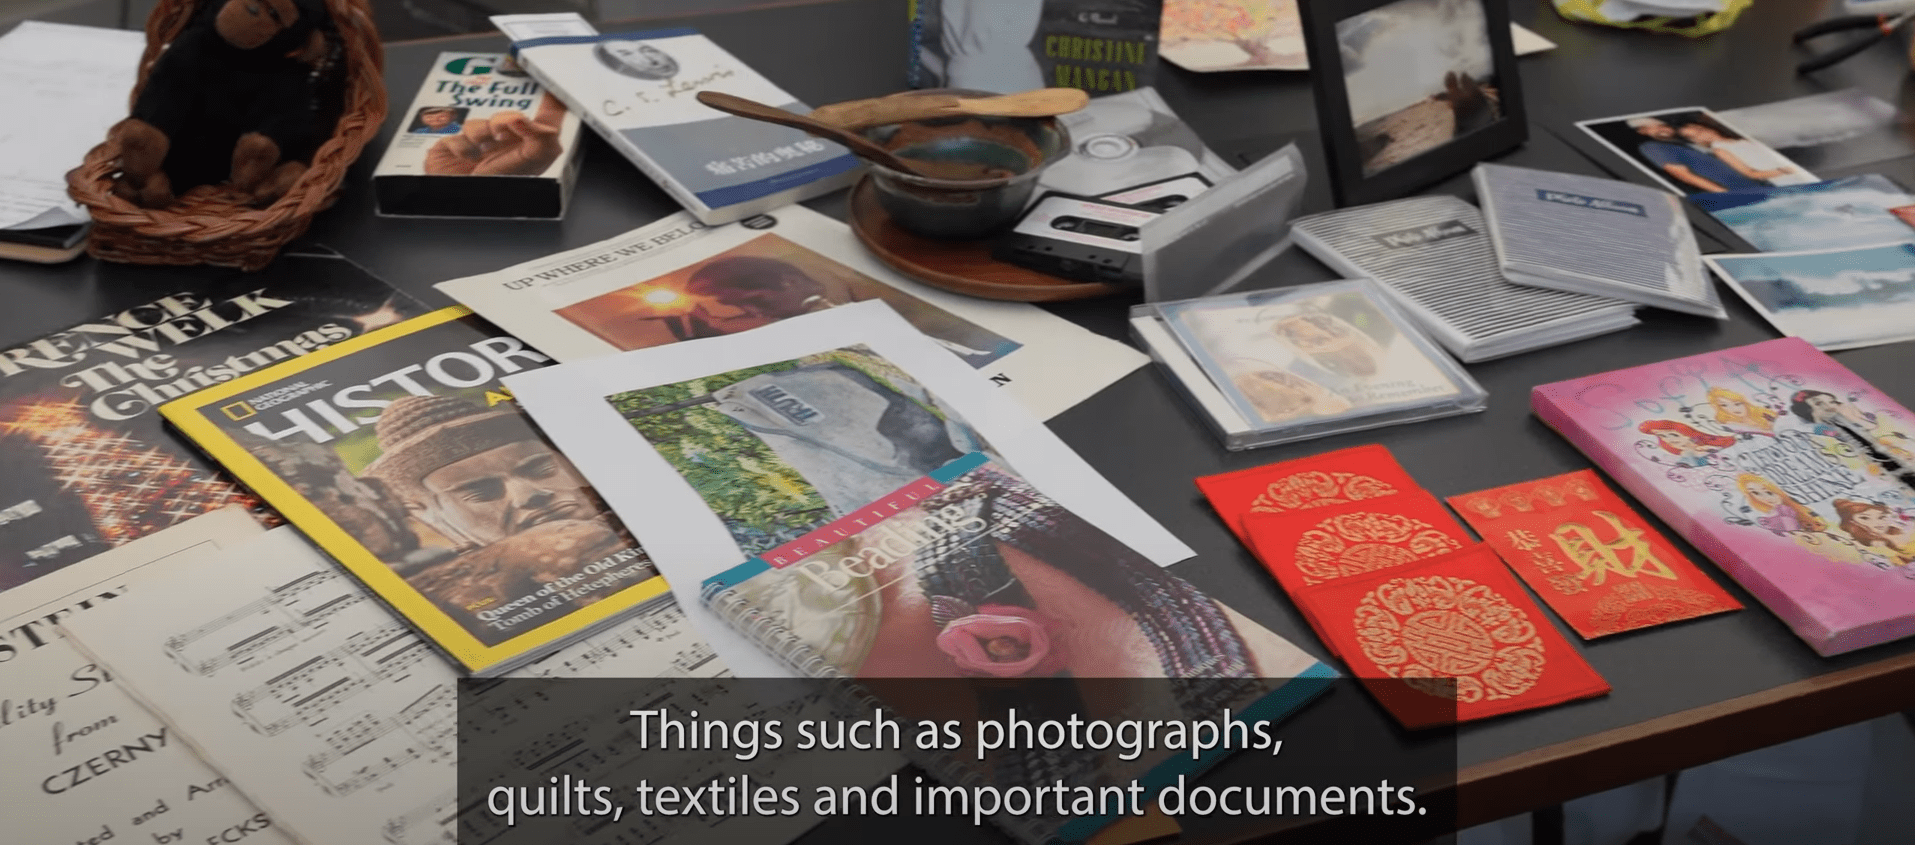 Table of books, magazines, photographs.  Text reads: Things such as photographs, quilts, textiles and important documents